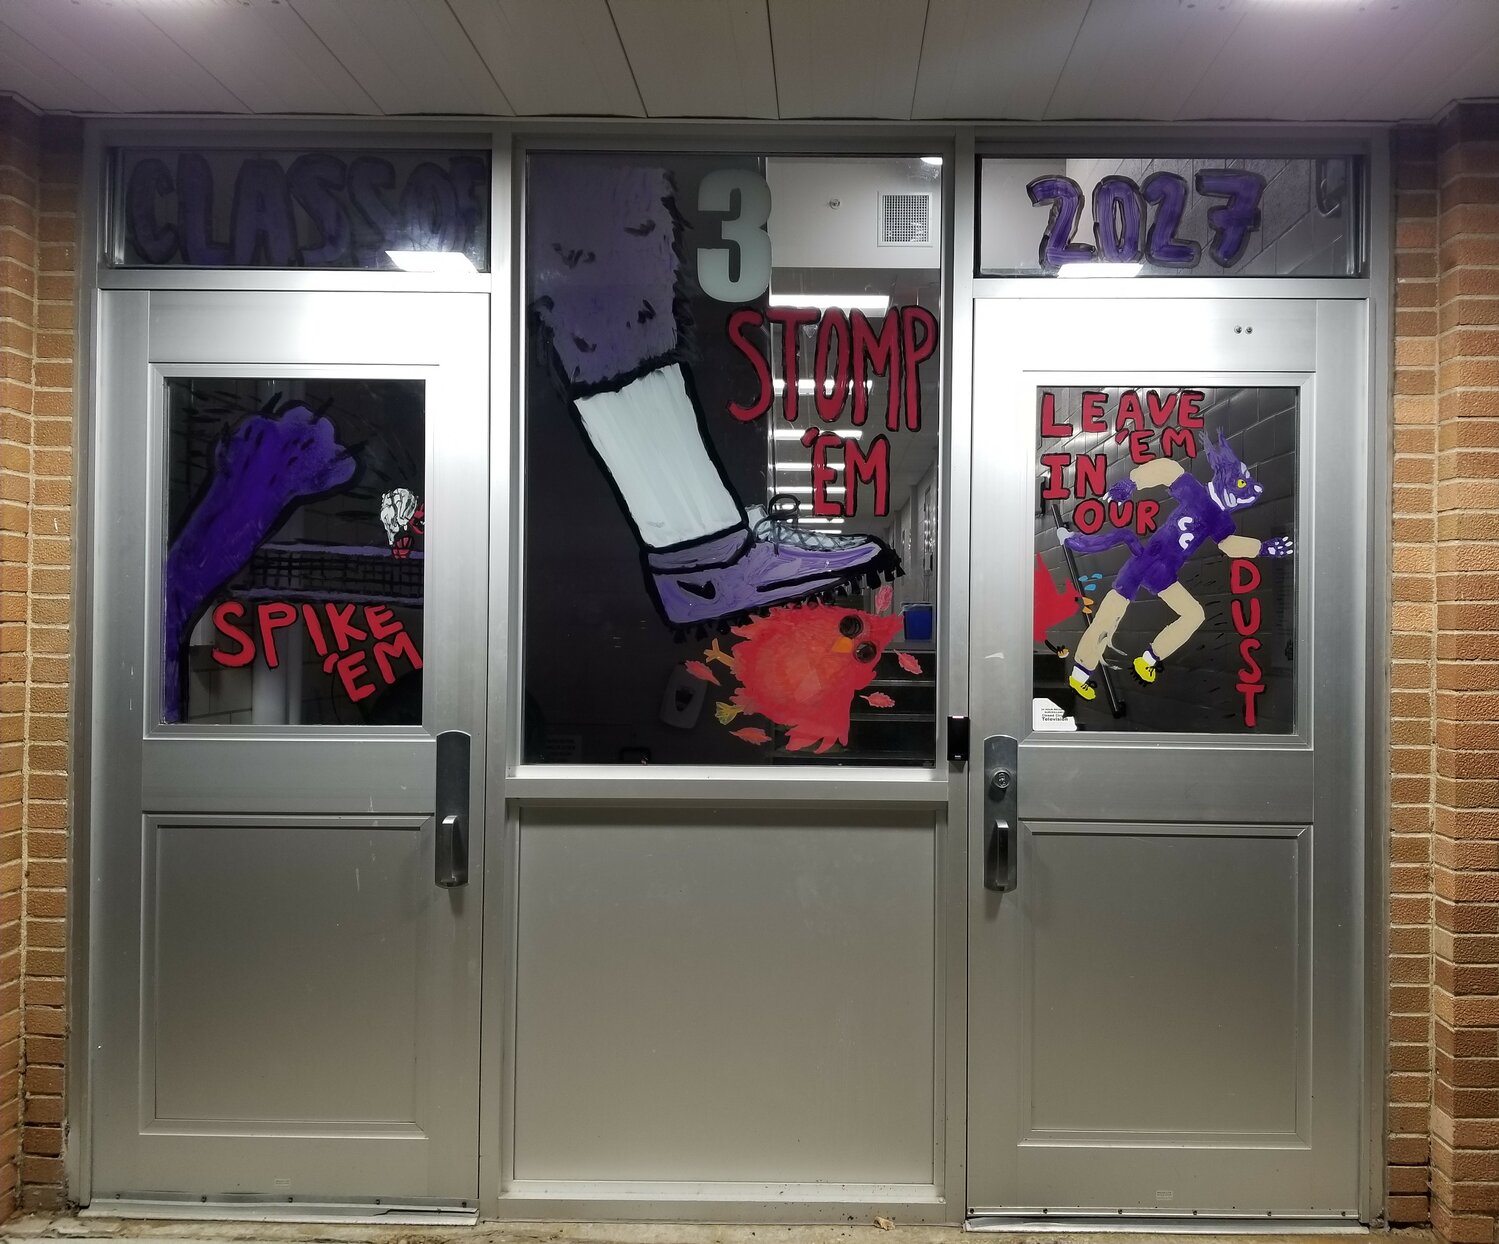 The class of 2027's homecoming window painting contest entry.